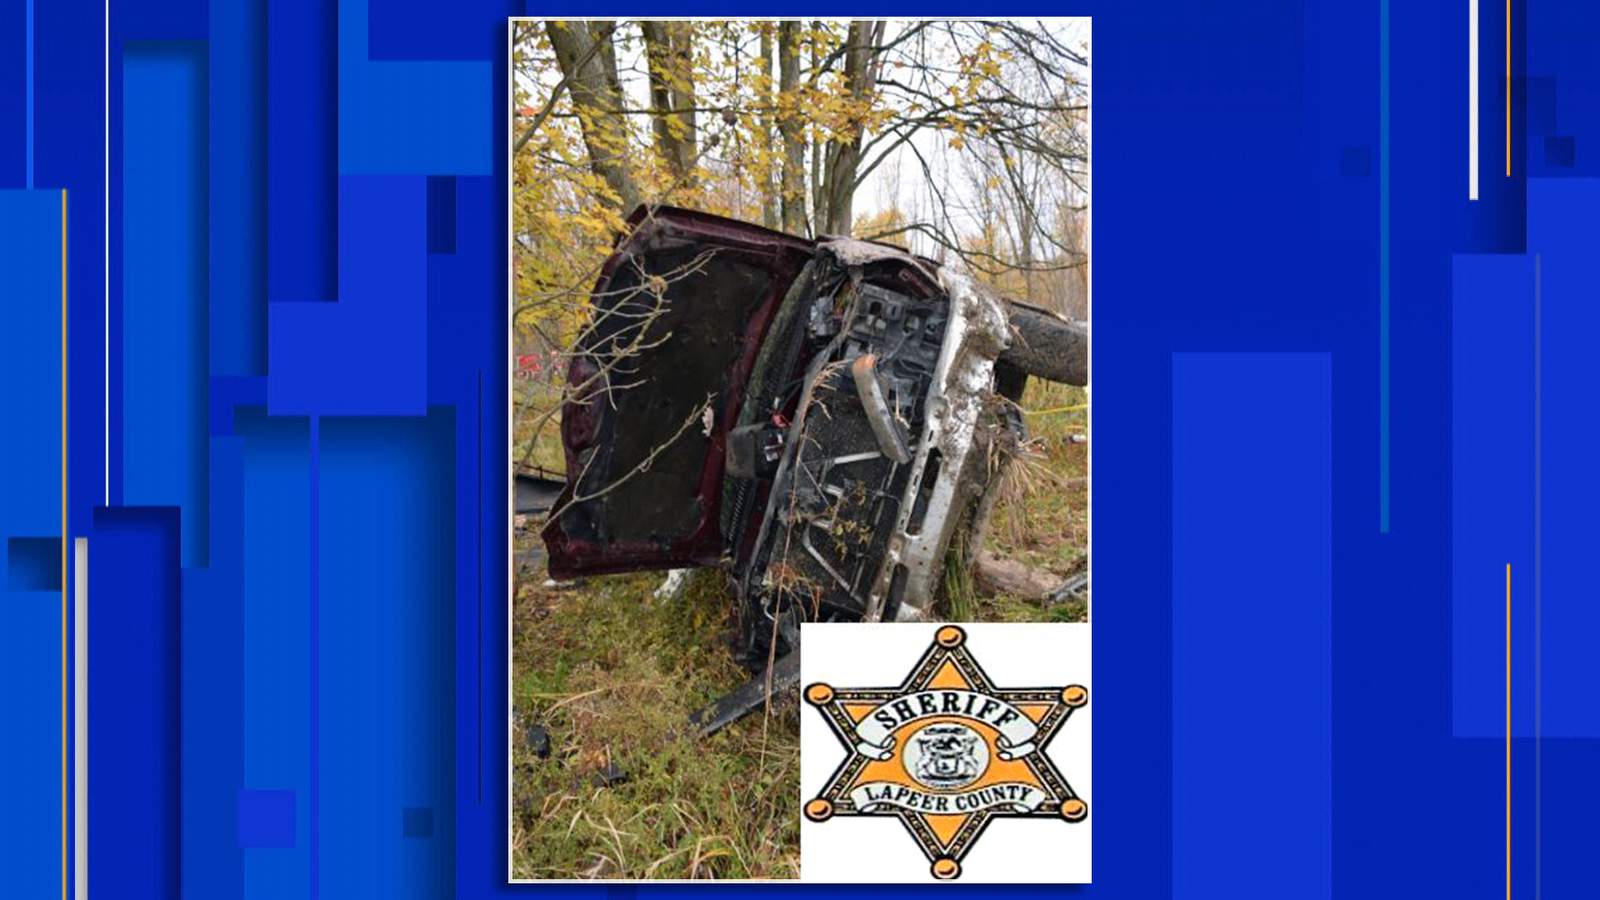 23-year-old man killed in crash in Lapeer County after leaving Halloween party